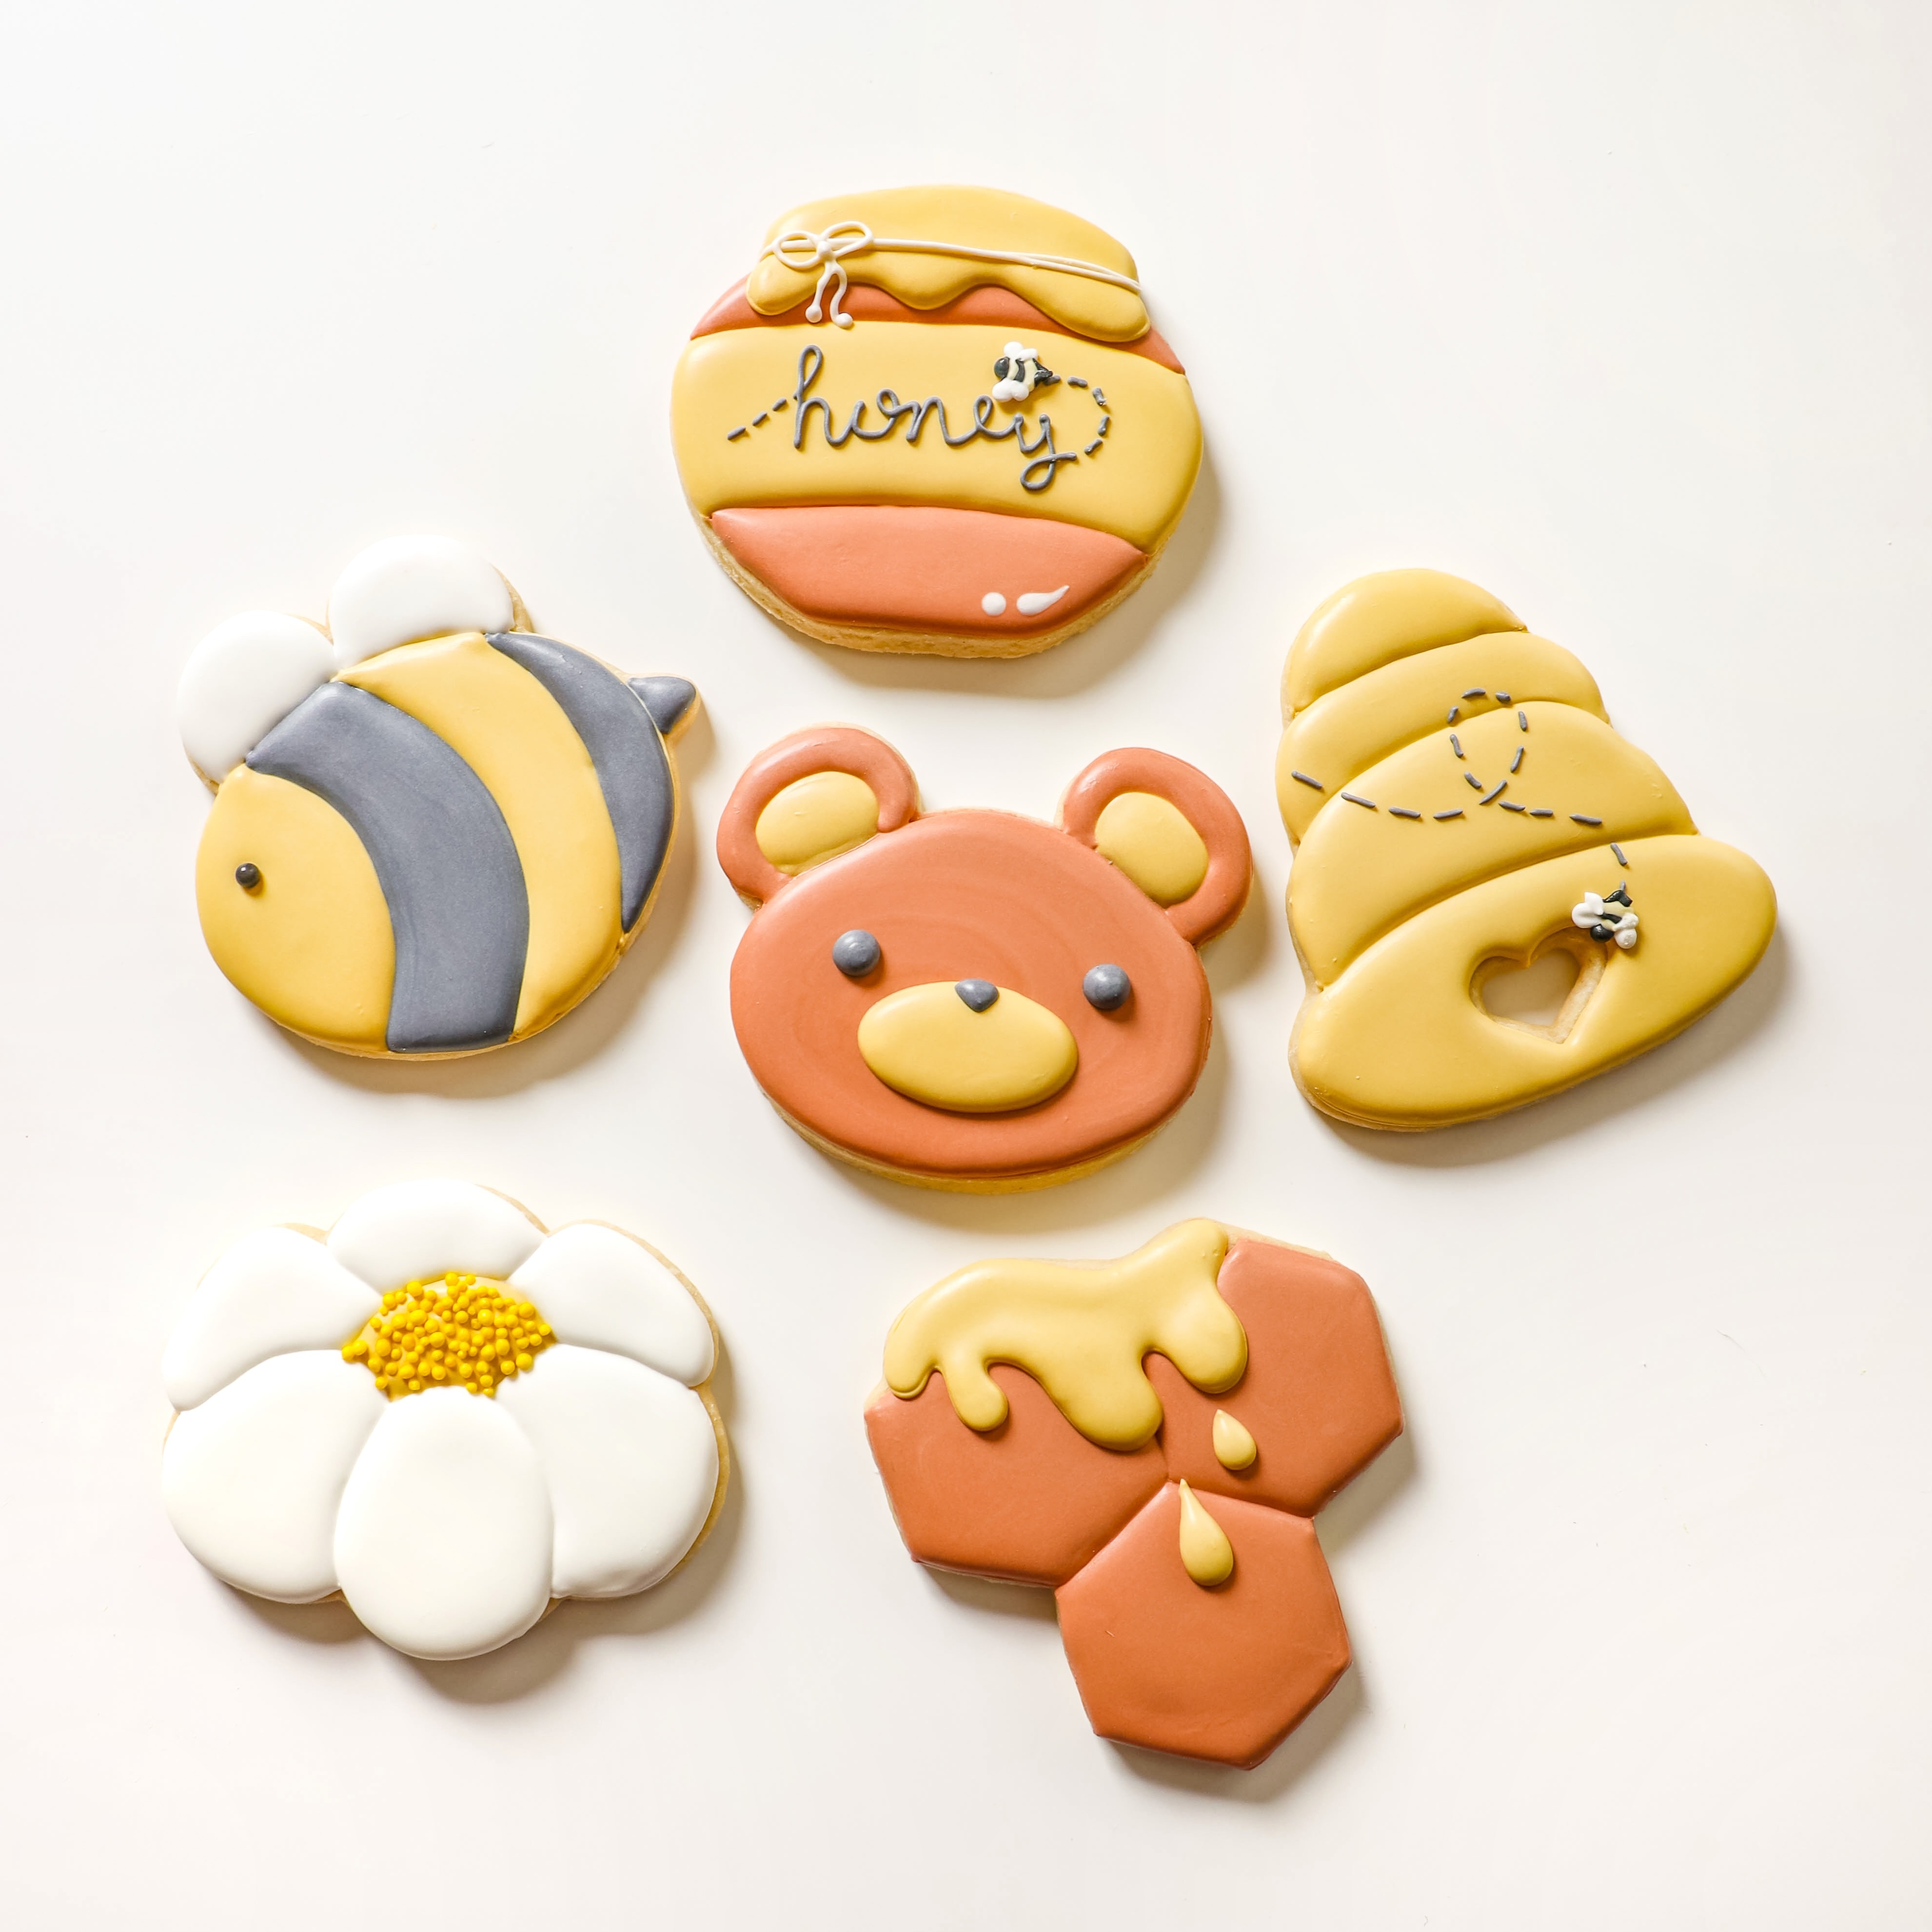 May-Oh Honey Bee Sugar Cookie Decorating Class